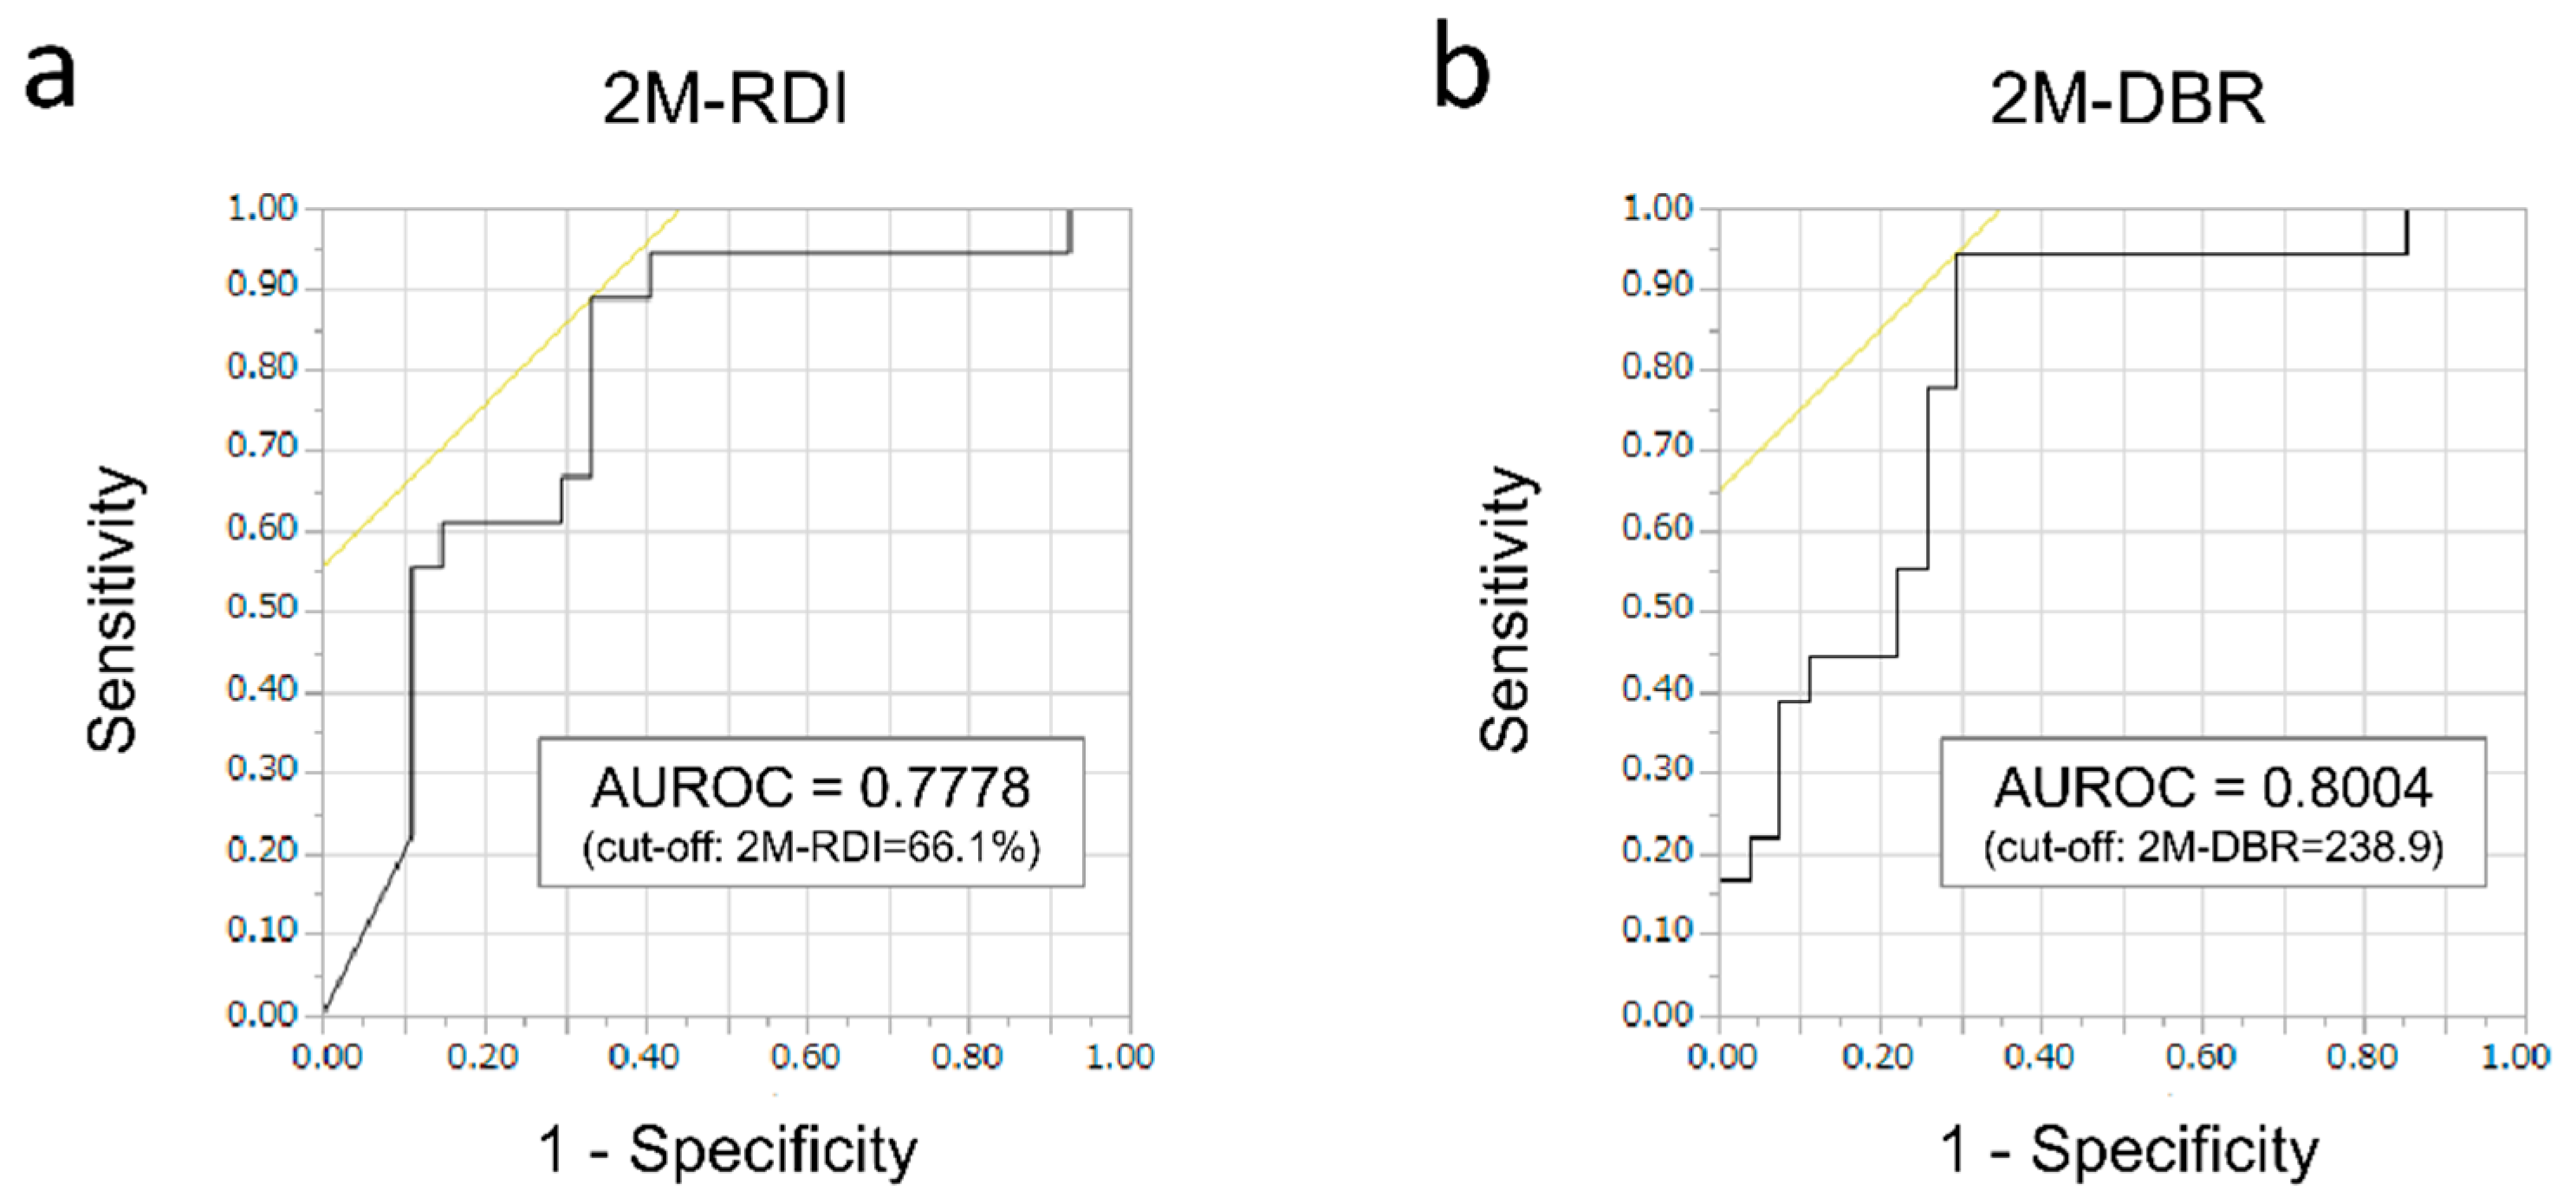 ...(ROC) curve analyses of the relative dose intensity at 60 days (2M-RDI)